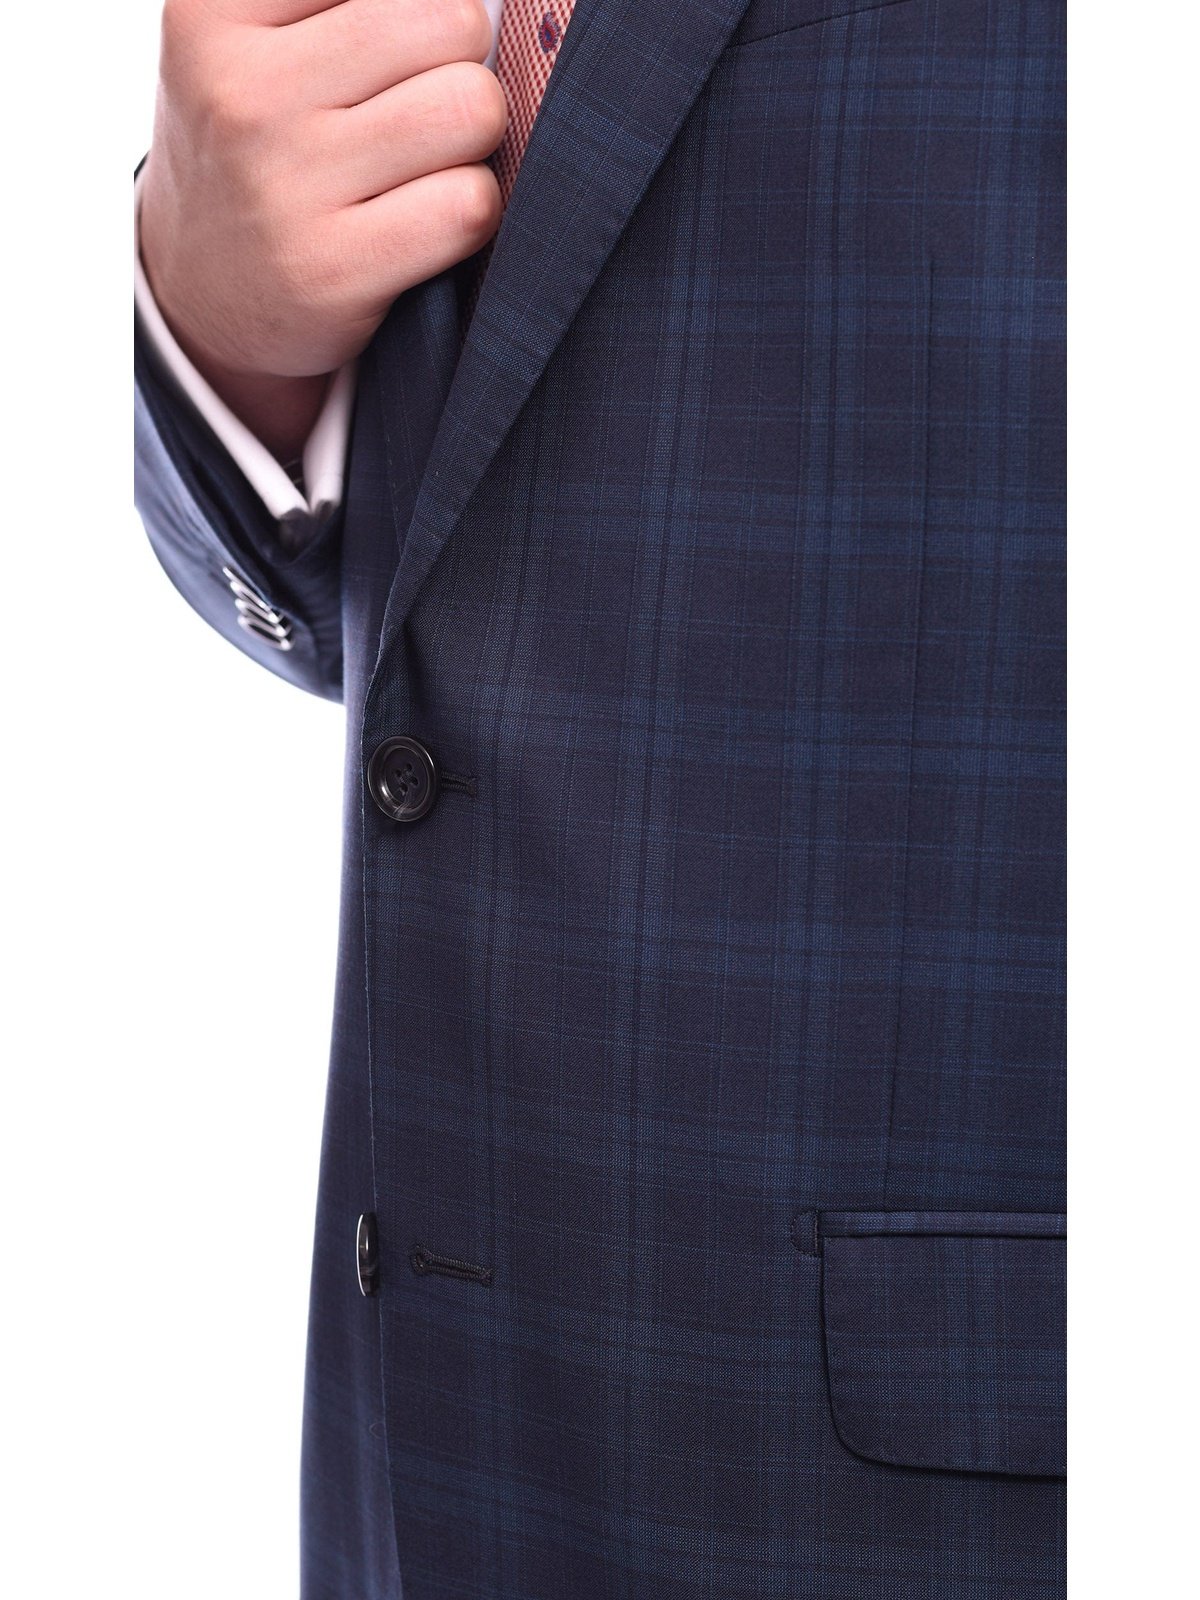 Napoli TWO PIECE SUITS Napoli Classic Fit Navy Blue Plaid Half Canvassed Super 120s Guabello Wool Suit